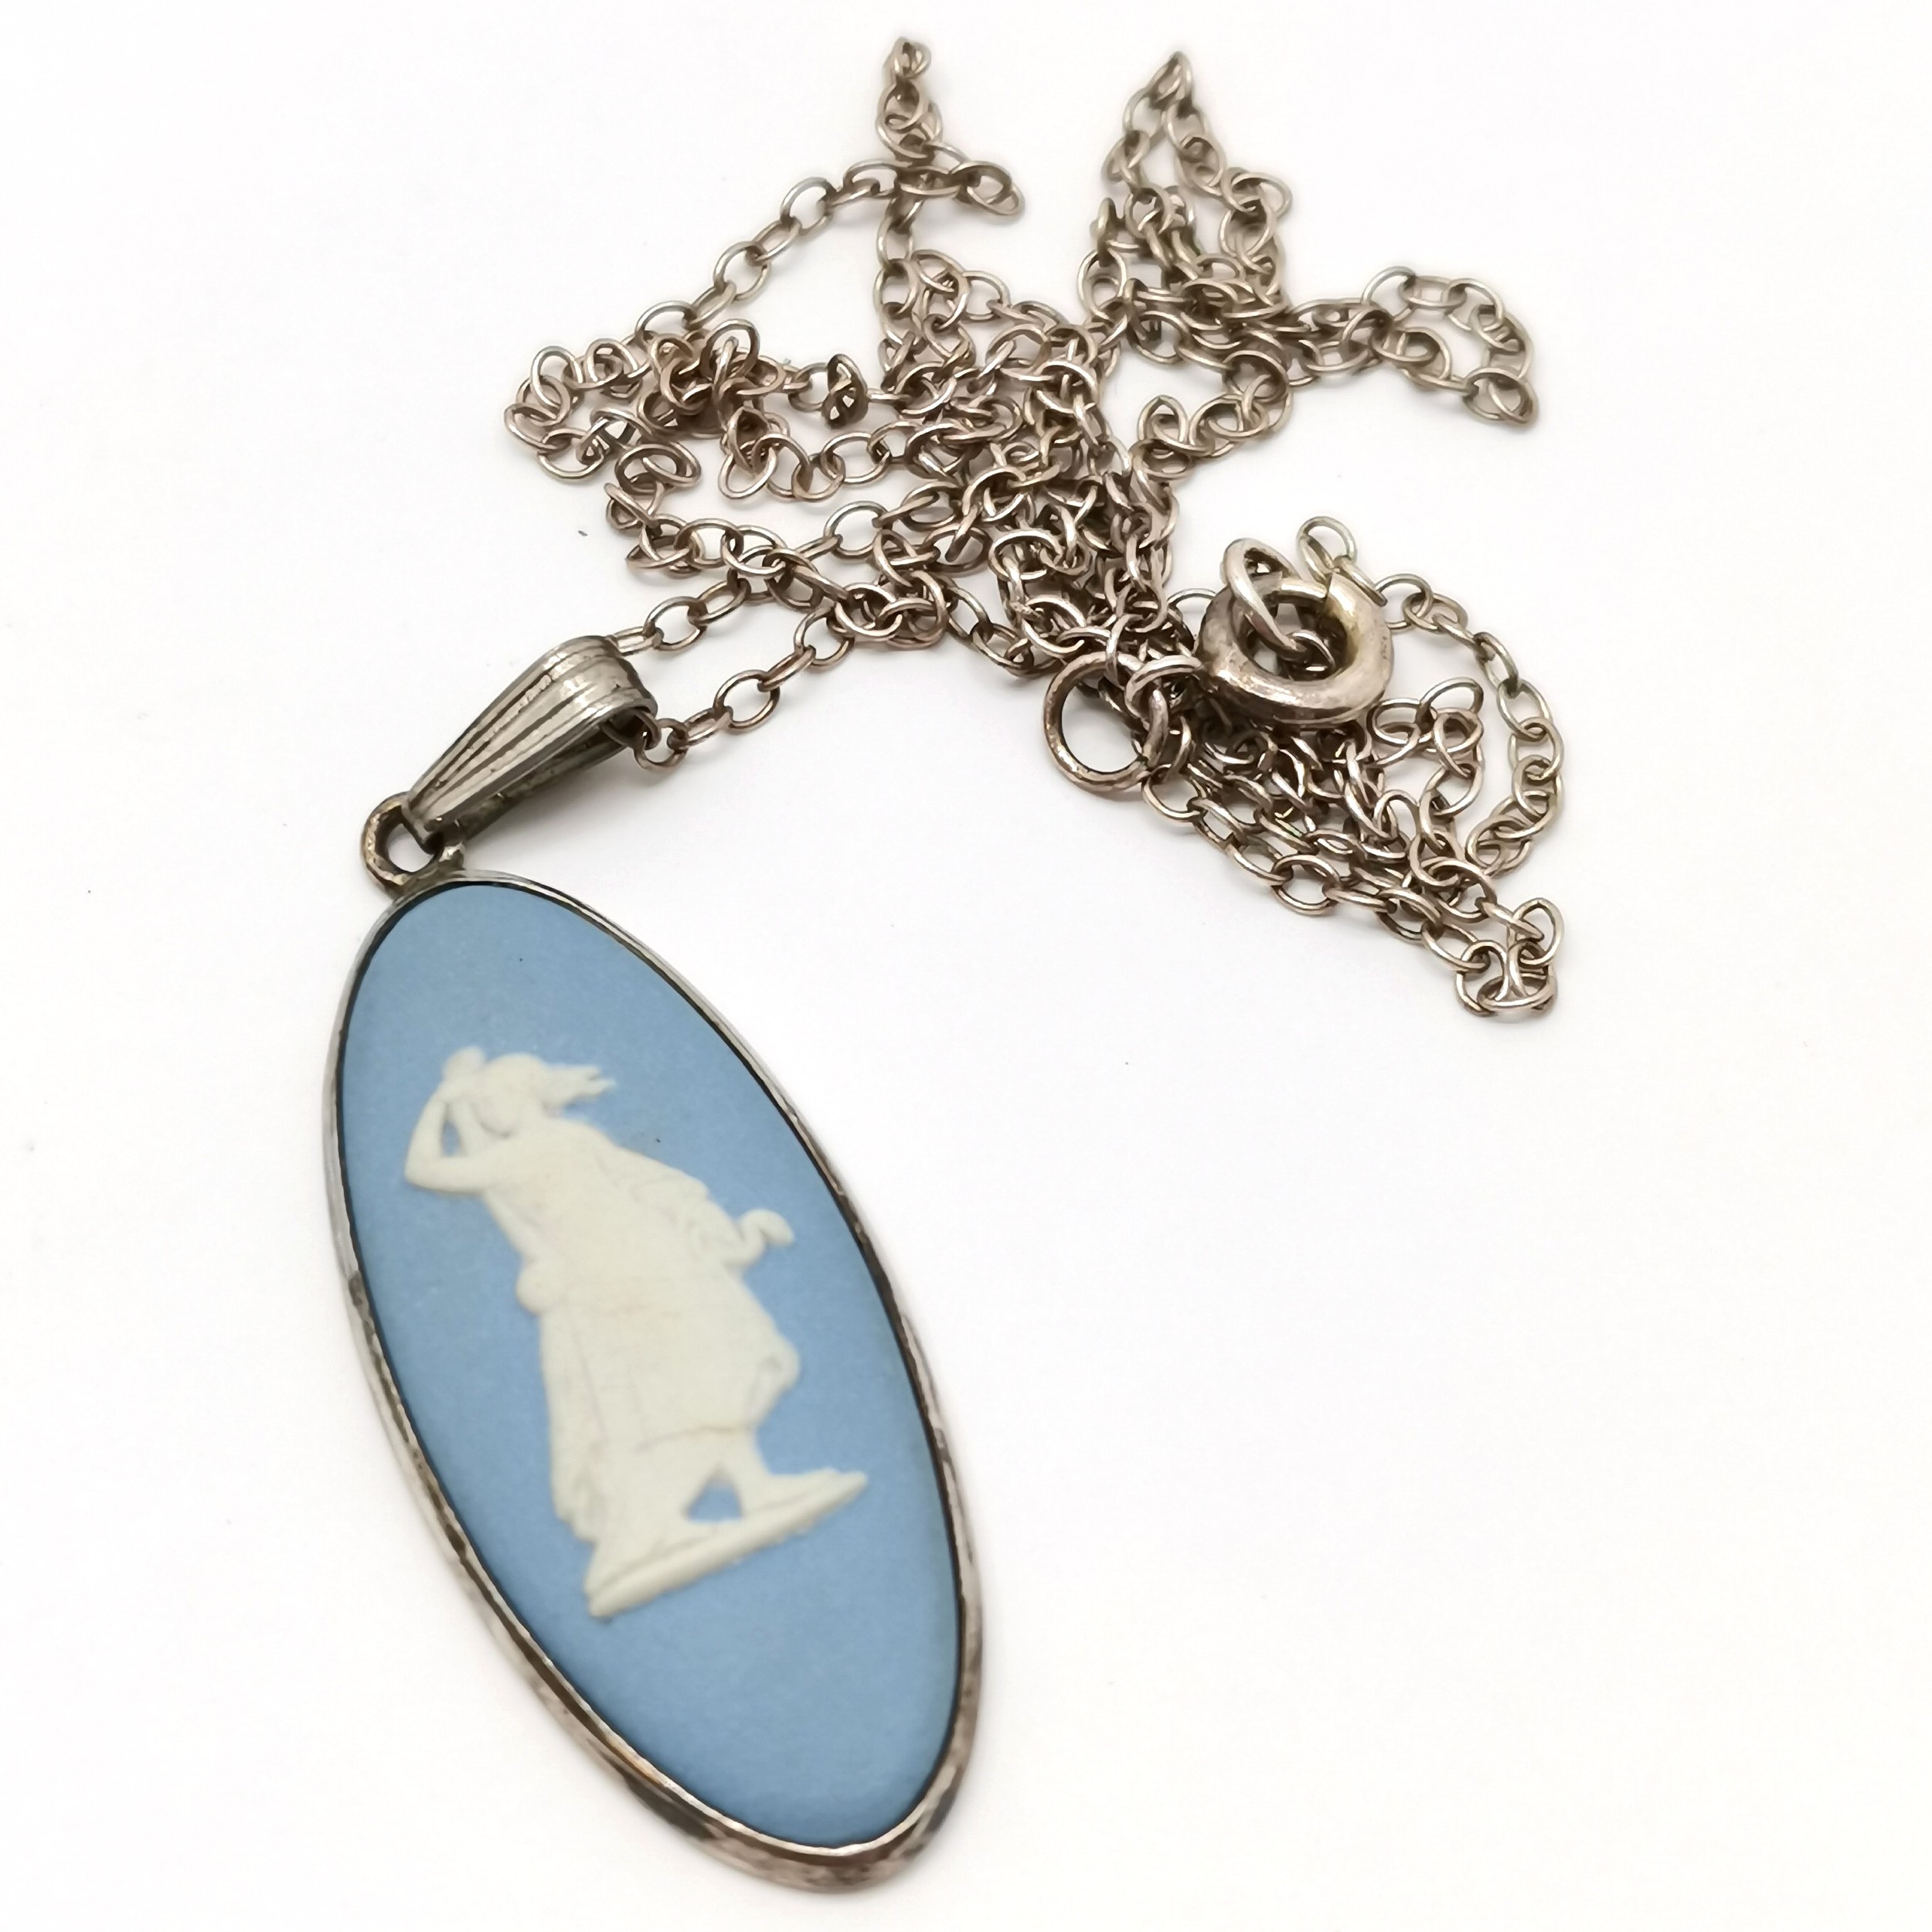 Wedgwood silver pendant on silver 46cm chain (in original box), strand of faux pearls with silver - Image 2 of 3